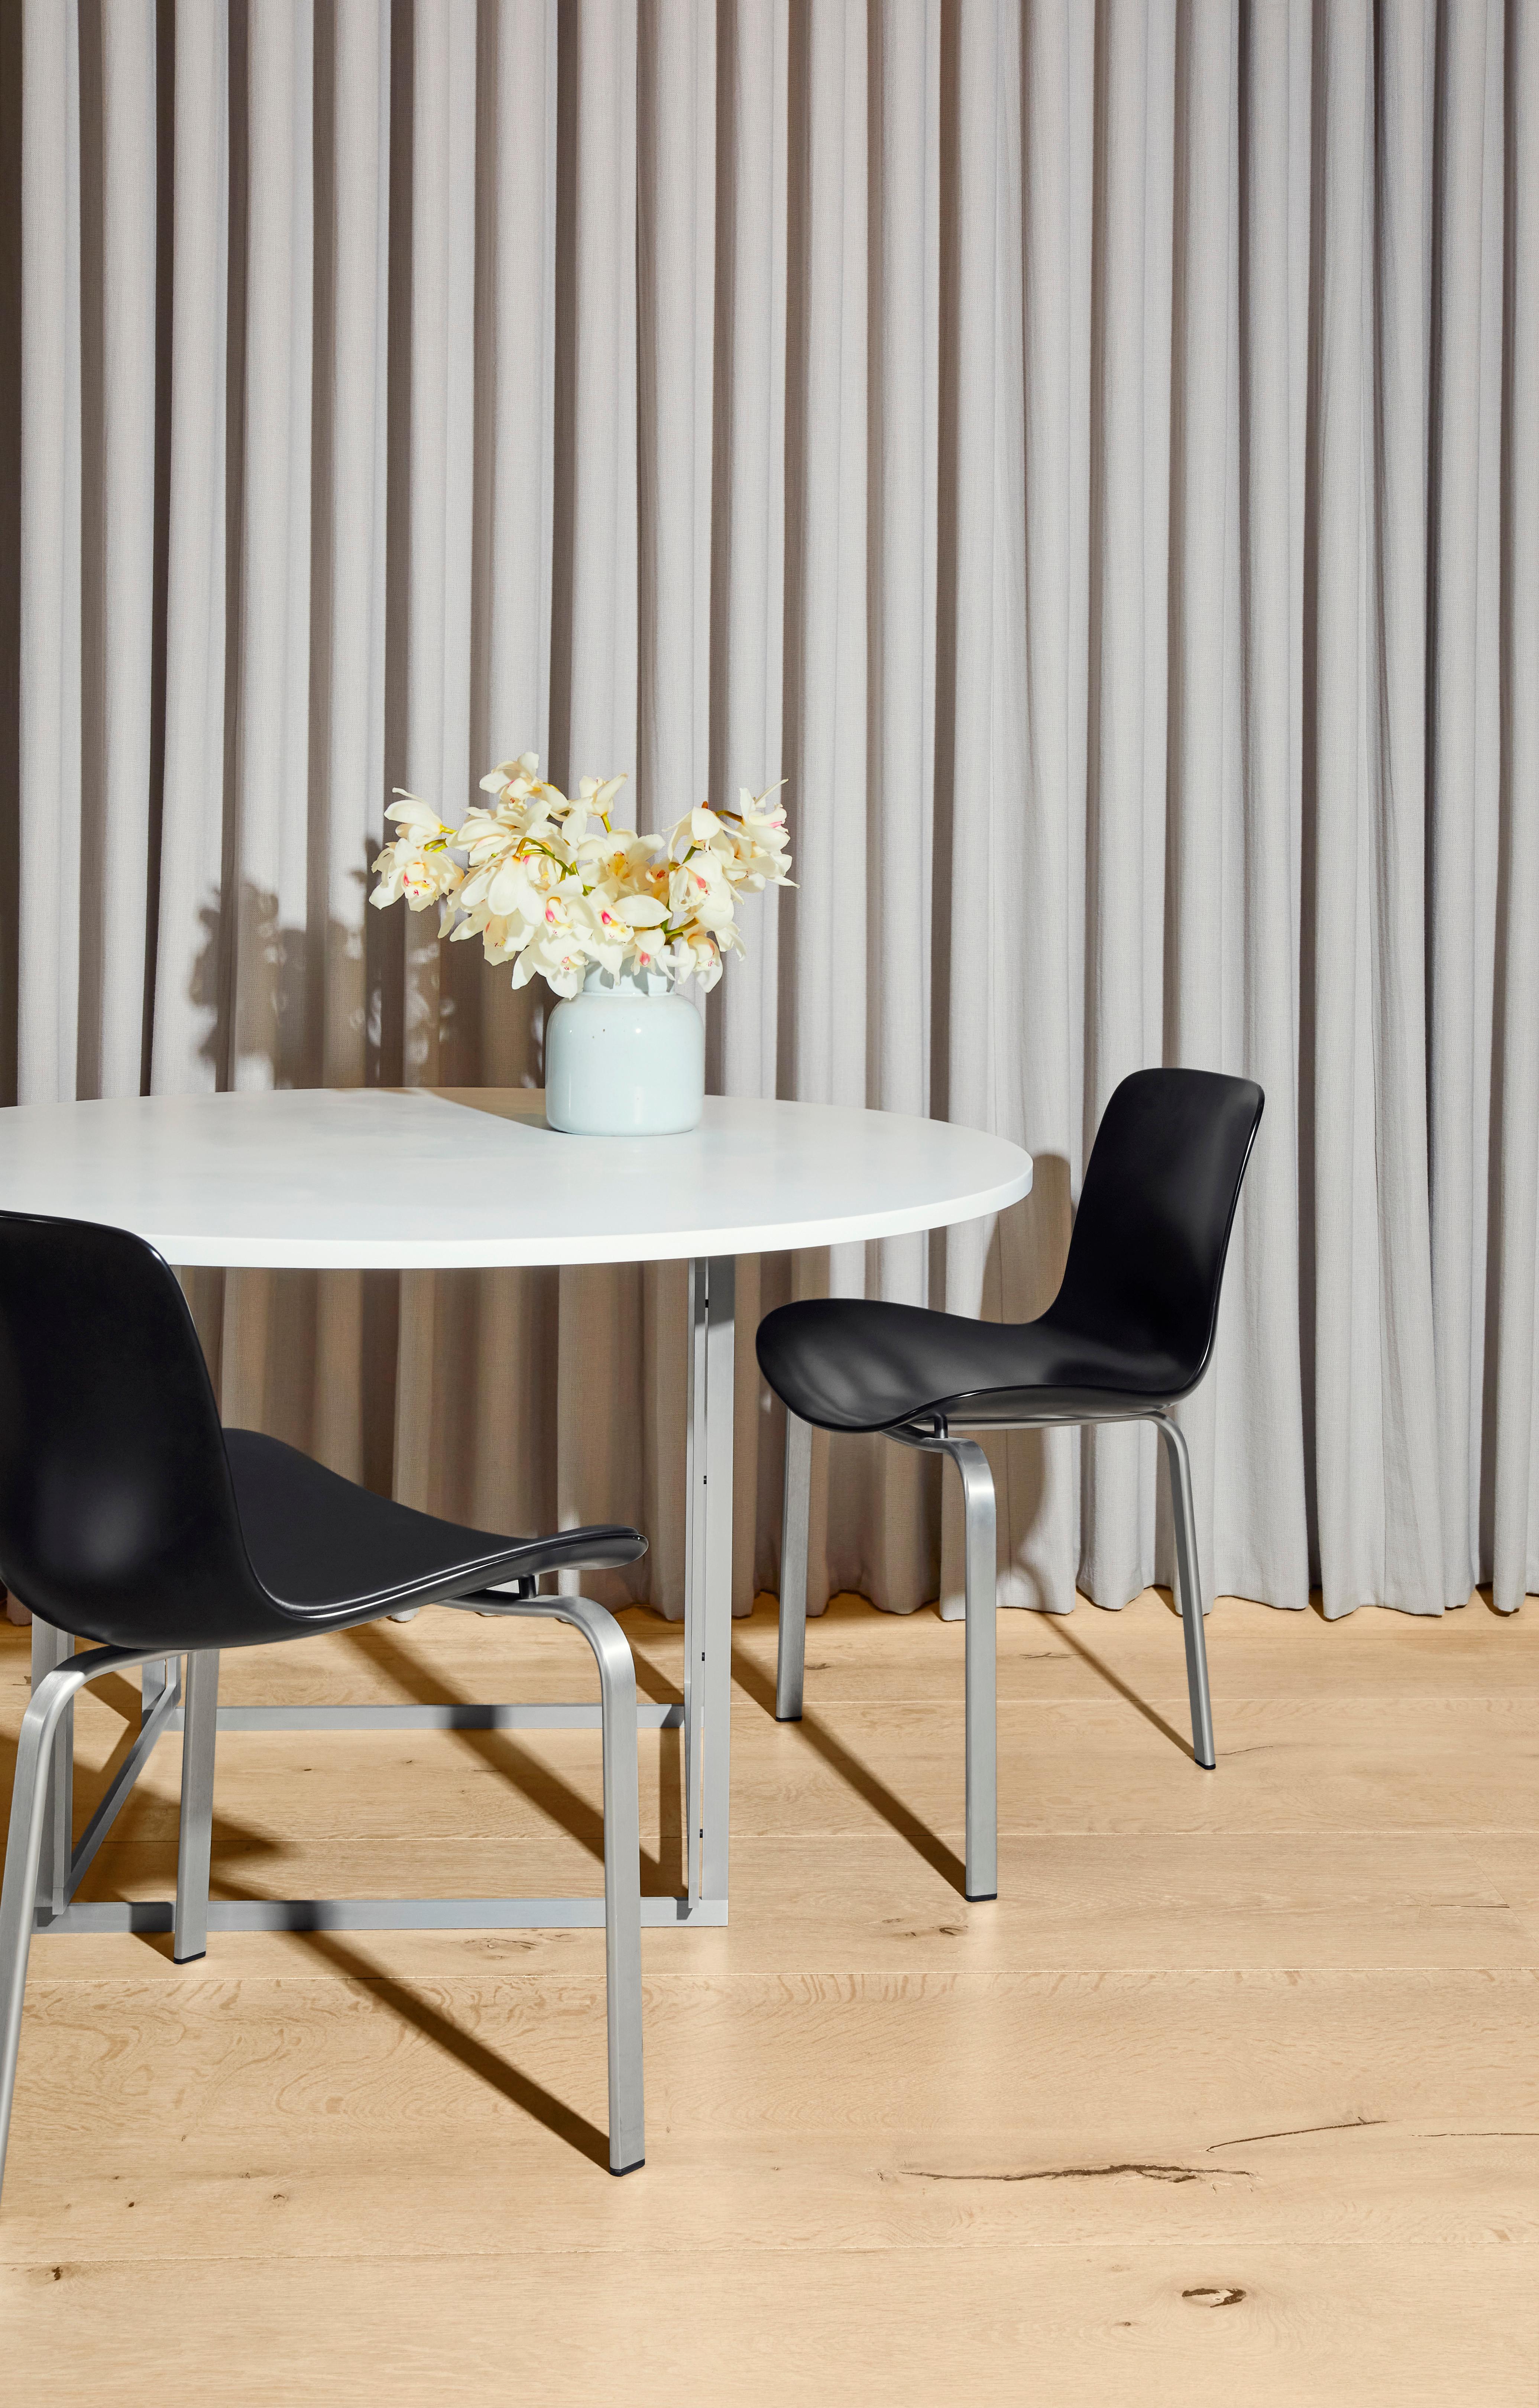 Poul Kjærholm 'PK8' Dining Chair for Fritz Hansen in Grace Leather Upholstery.

Established in 1872, Fritz Hansen has become synonymous with legendary Danish design. Combining timeless craftsmanship with an emphasis on sustainability, the brand’s